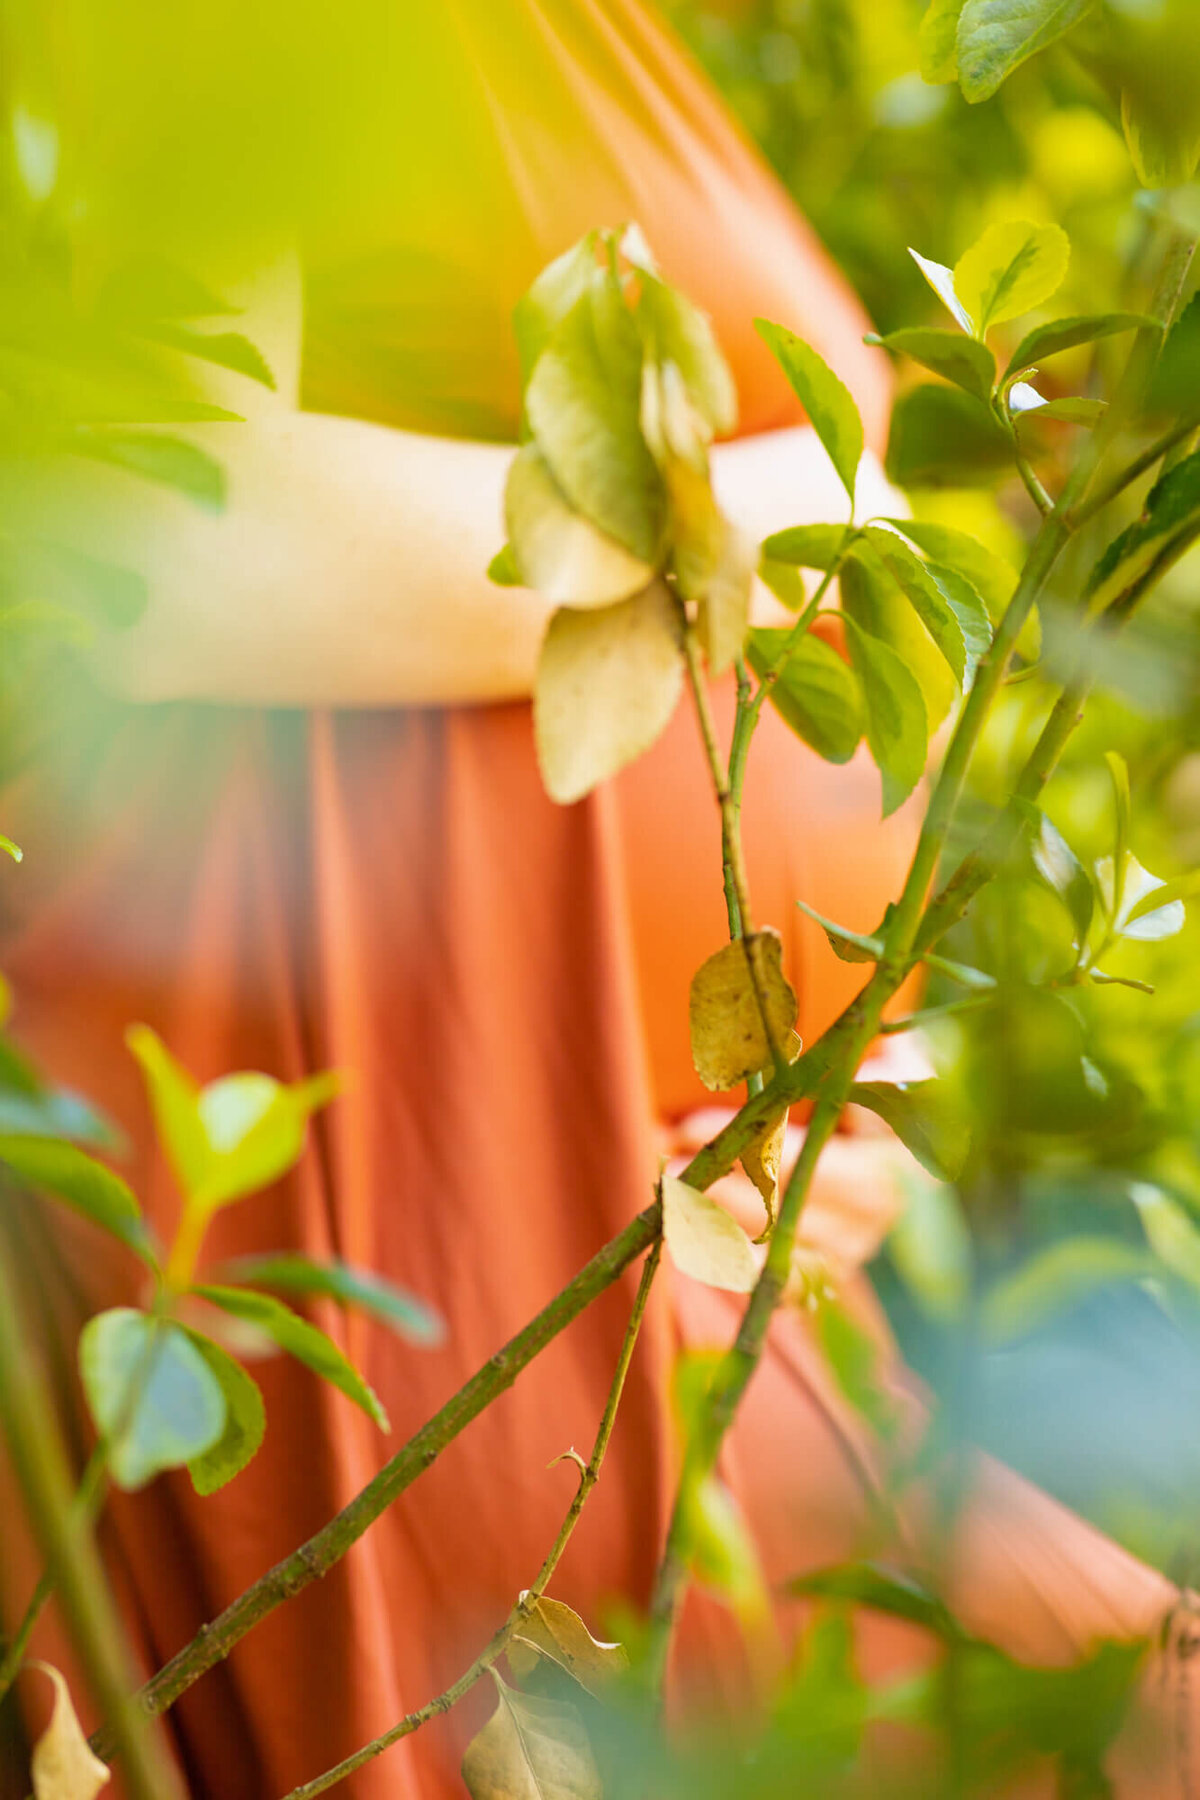 Expectant mom in a burnt orange dress in a garden